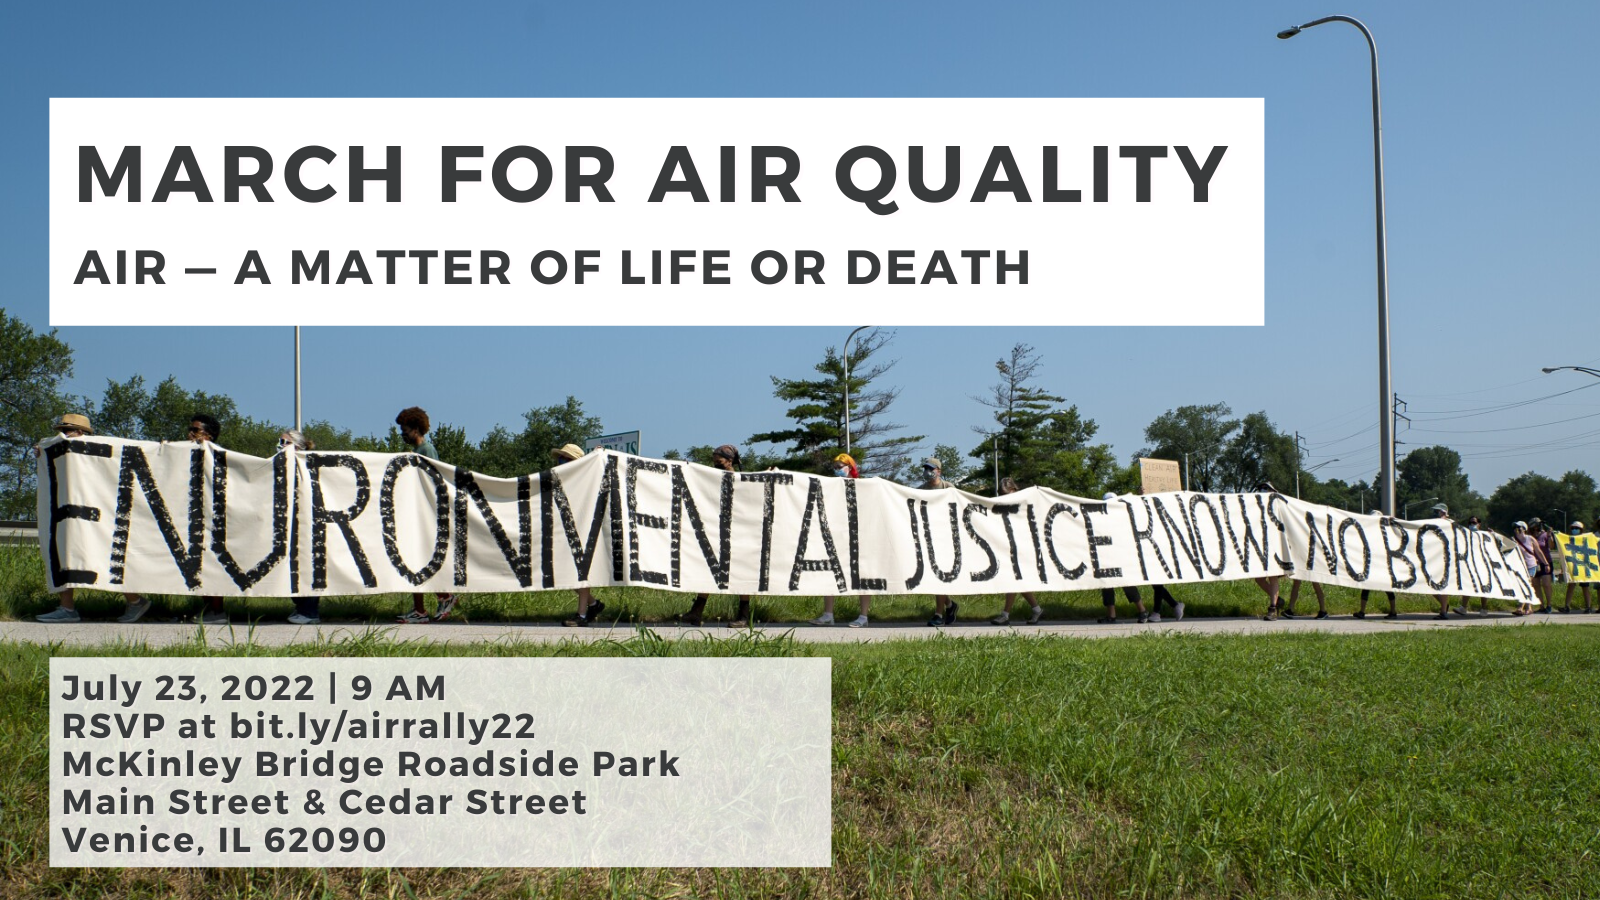 A graphic advertises the Air Quality Bridge Rally, which will take place on Saturday, July 23 at the McKinley Bridge.